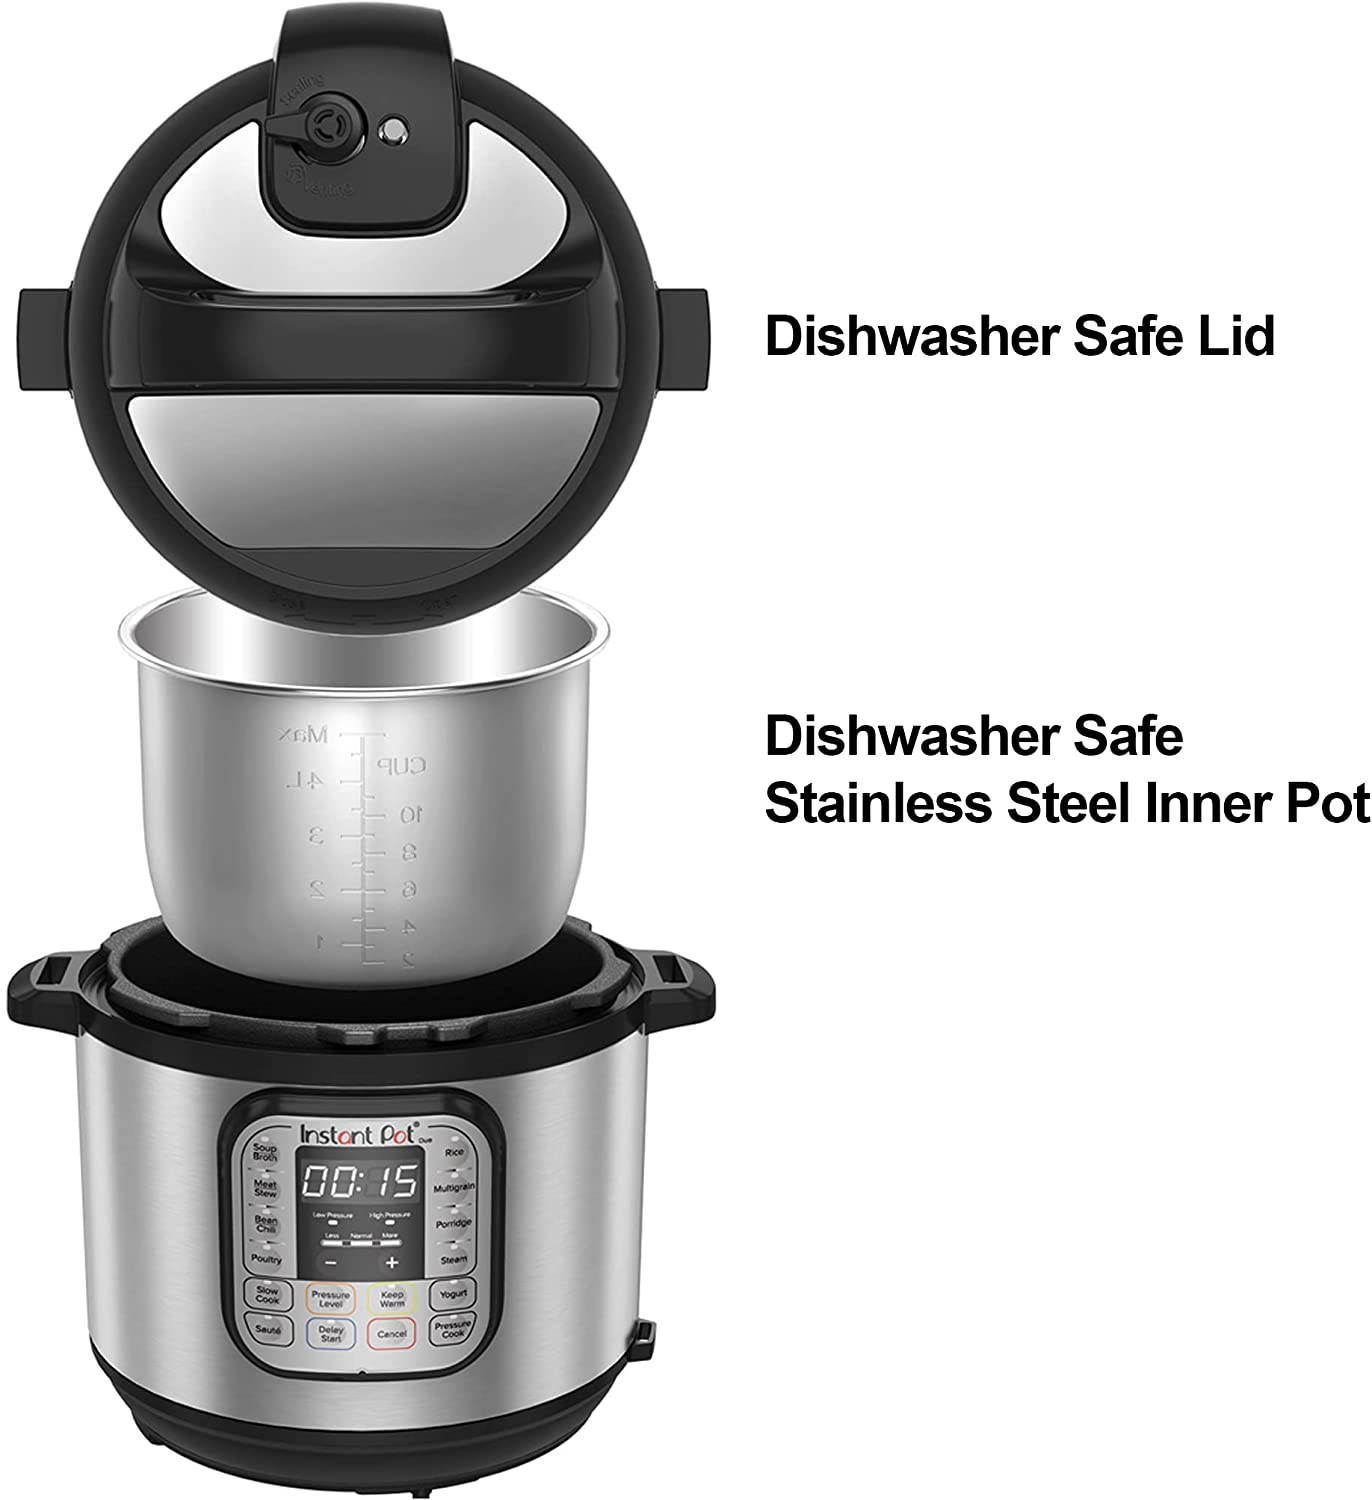 Instant Pot Duo™ 6 Quart Multi-Cooker, Red Stainless Steel 